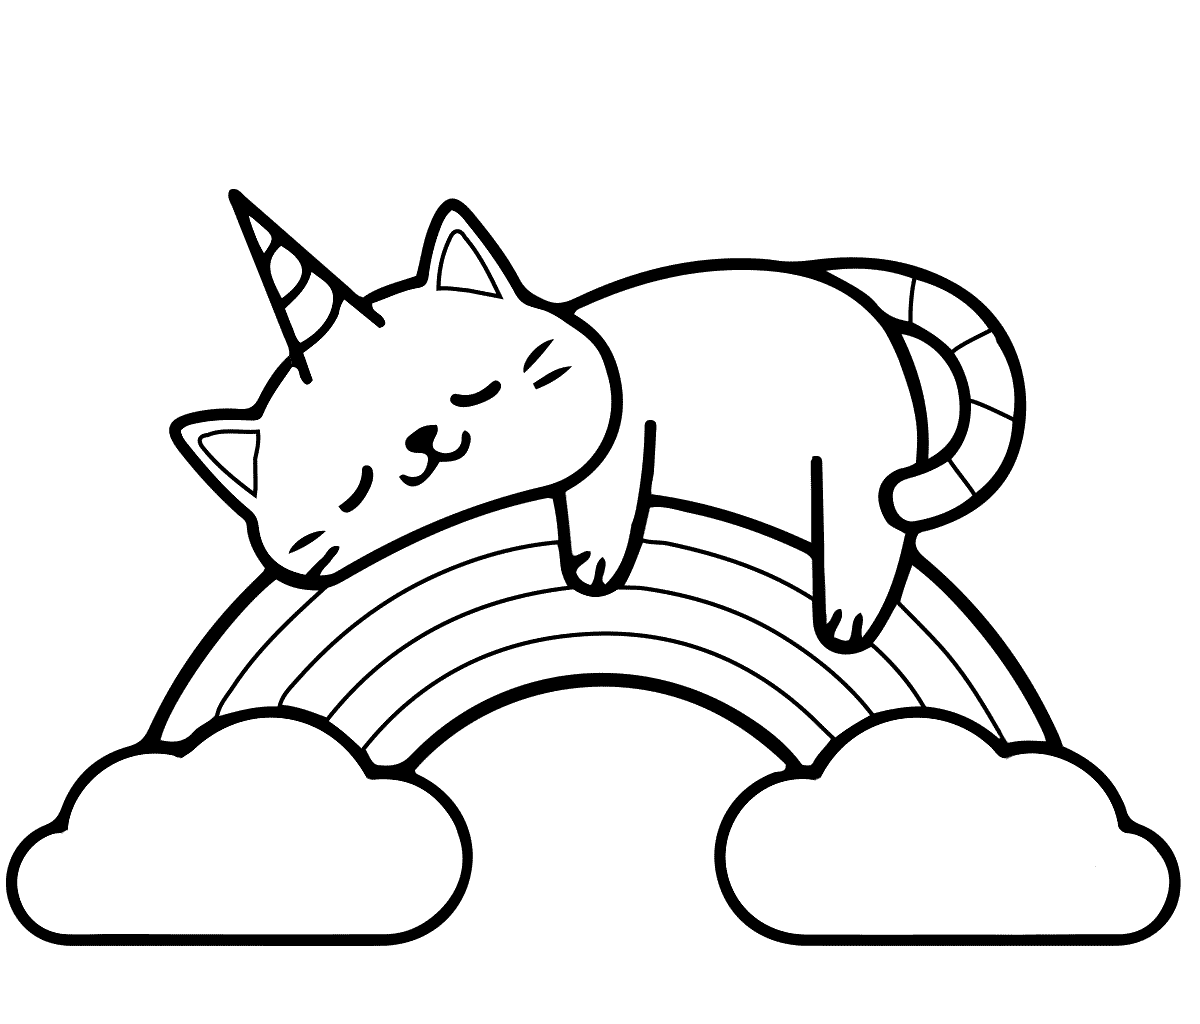 Unicorn cat lies on the rainbow Coloring Pages Unicorn Cat Coloring